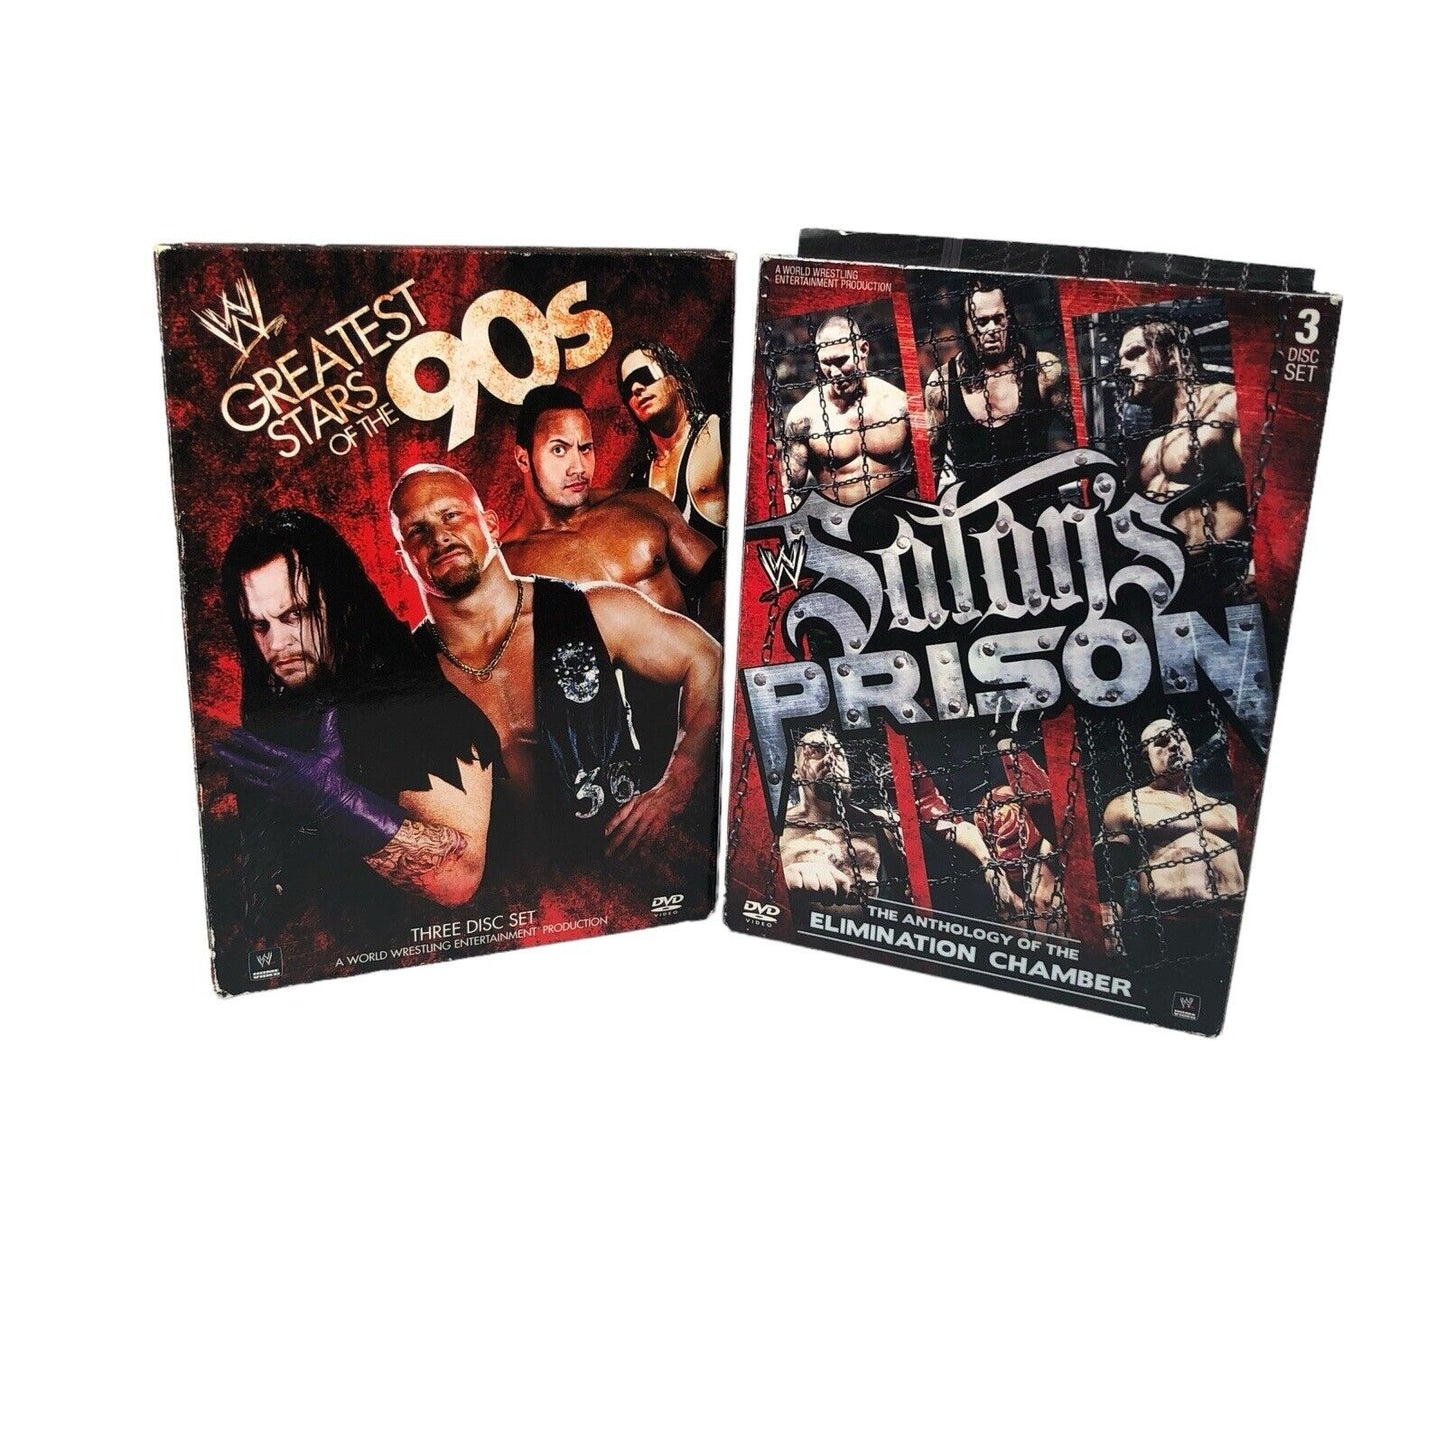 lot of 2 WWE DVD Compilations Satan’s Prison Greatest Stars of the 90s